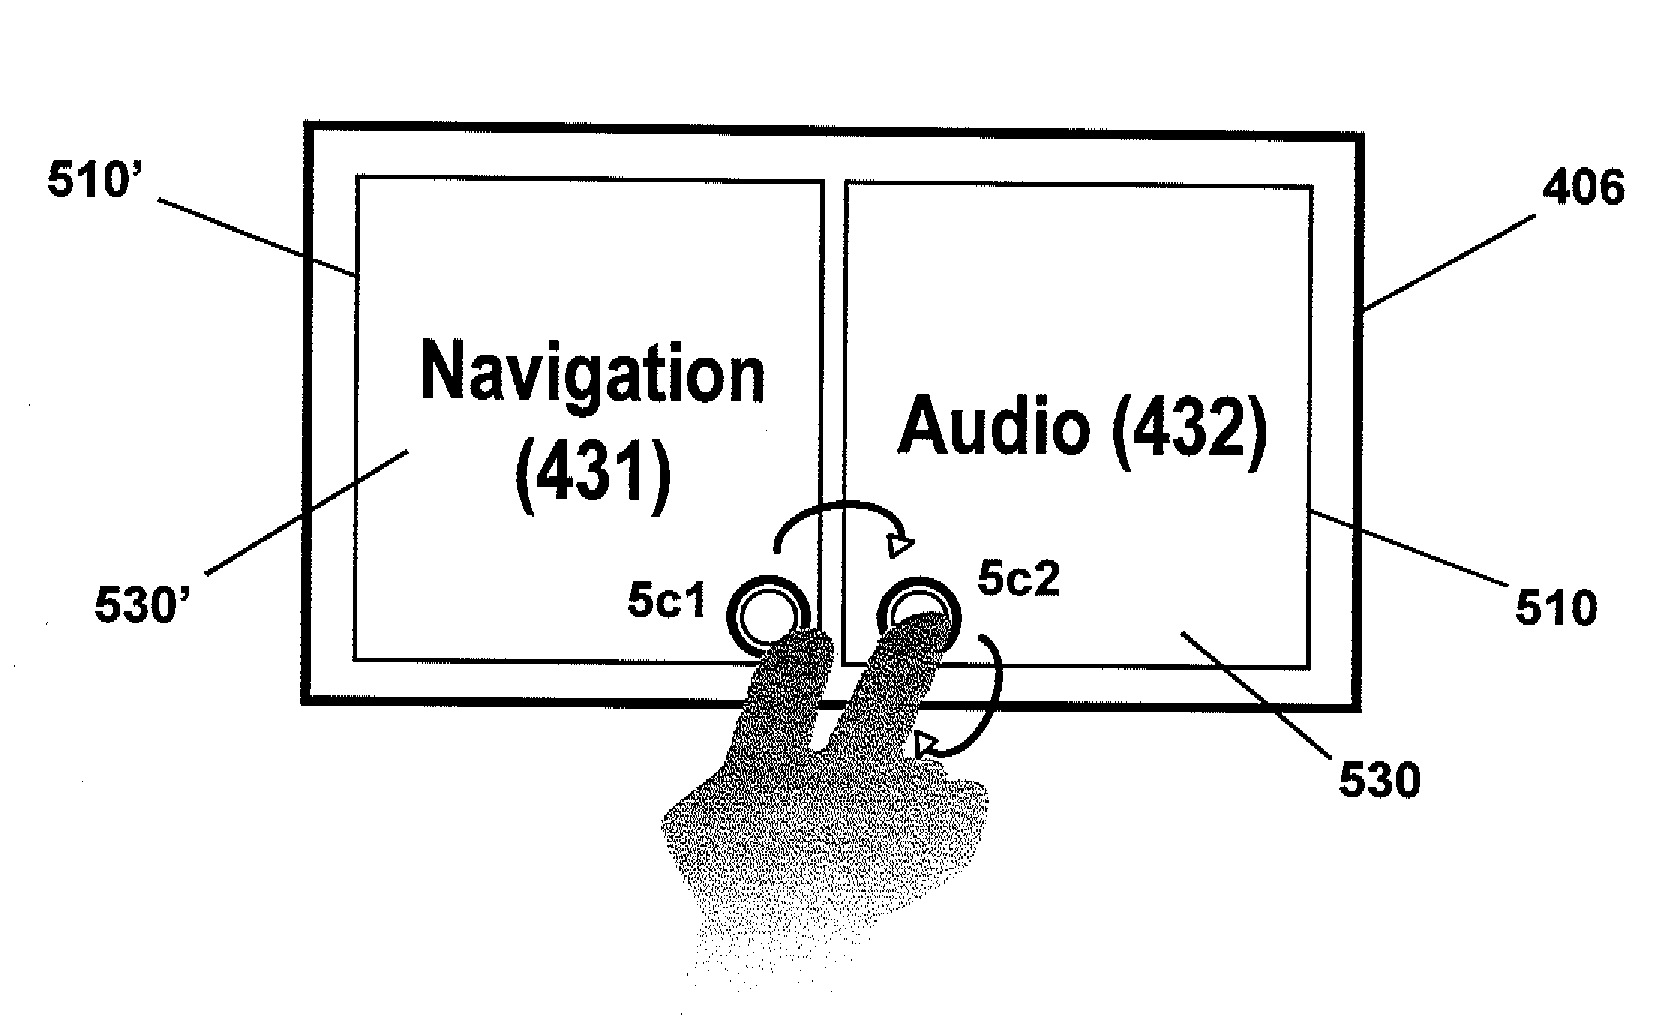 Method and apparatus for controlling and displaying contents in a user interface